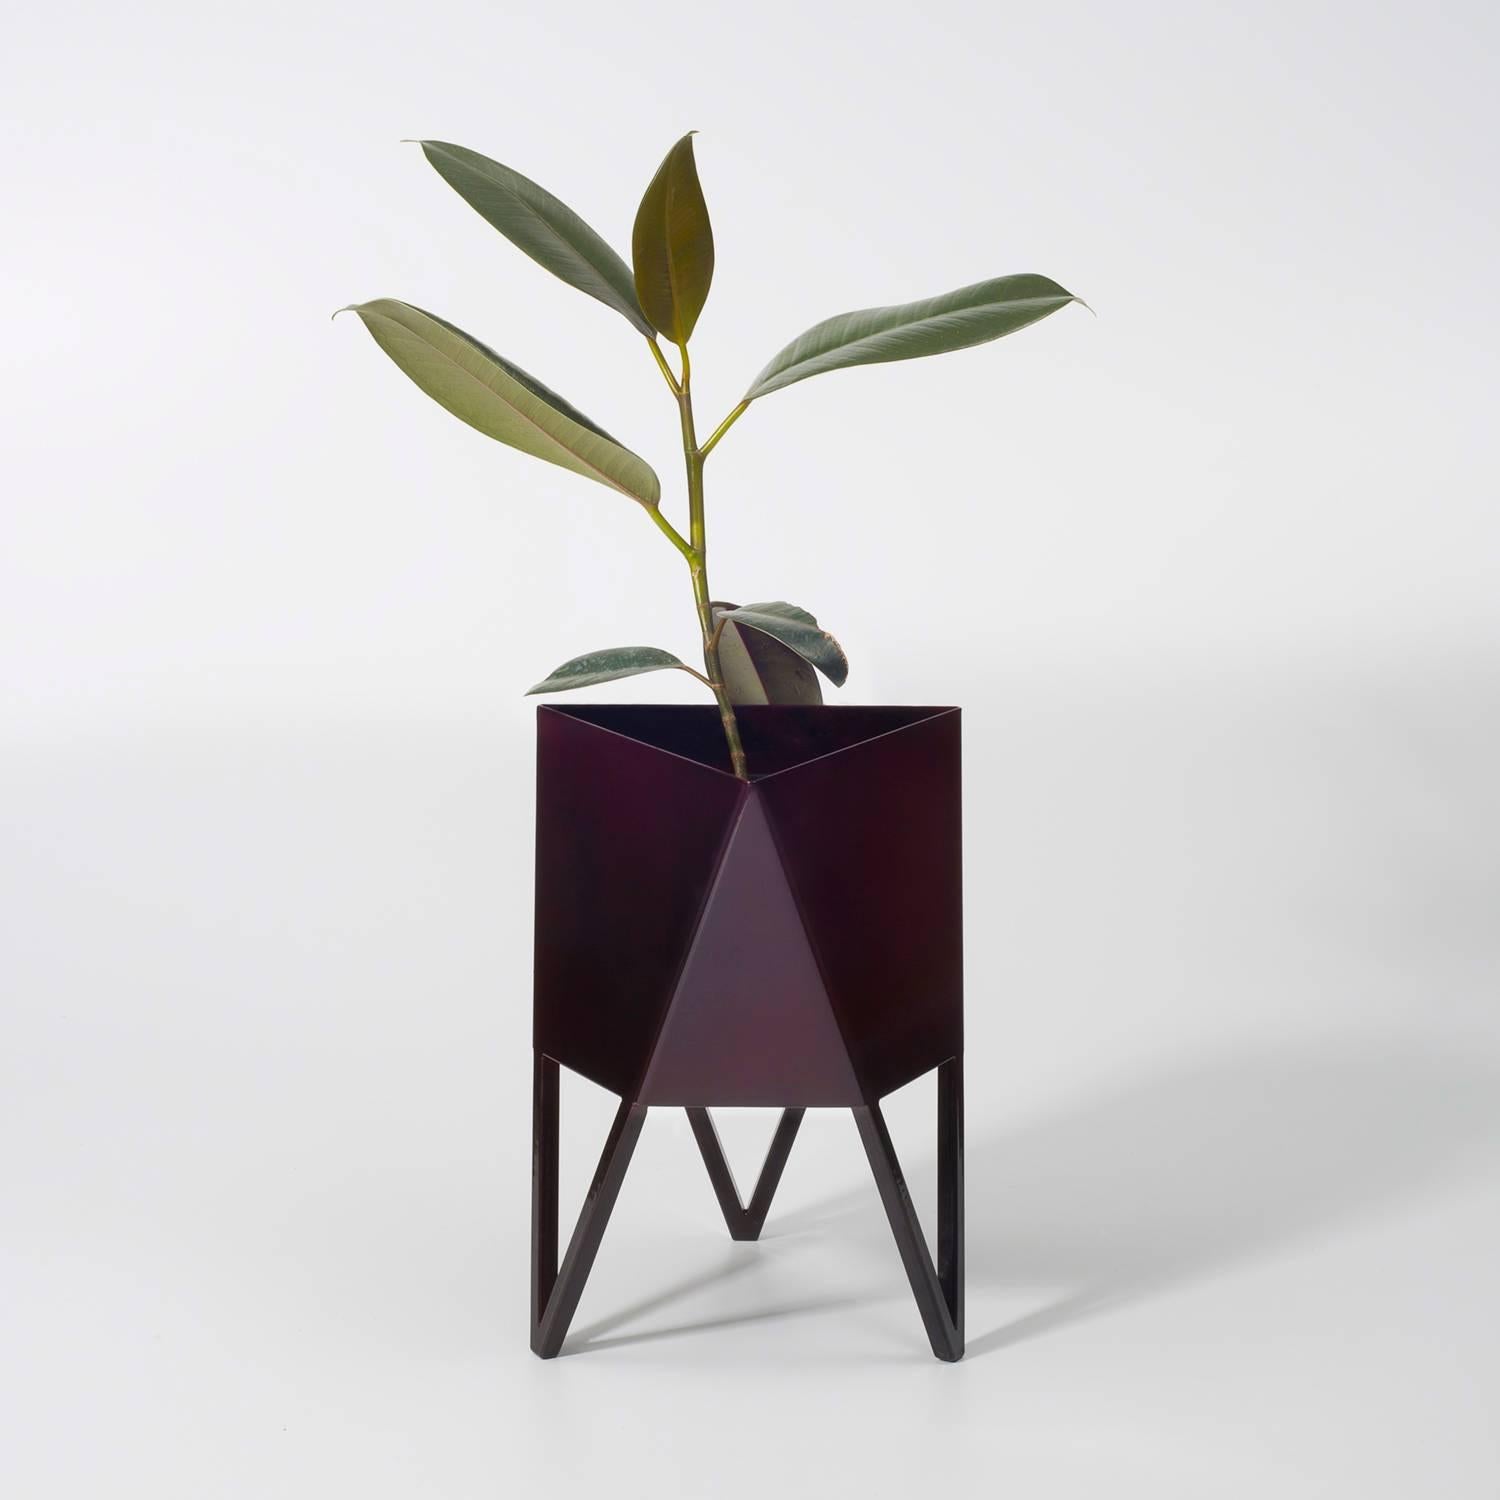 Contemporary Deca Planter in Light Pink Steel, Large, by Force/Collide